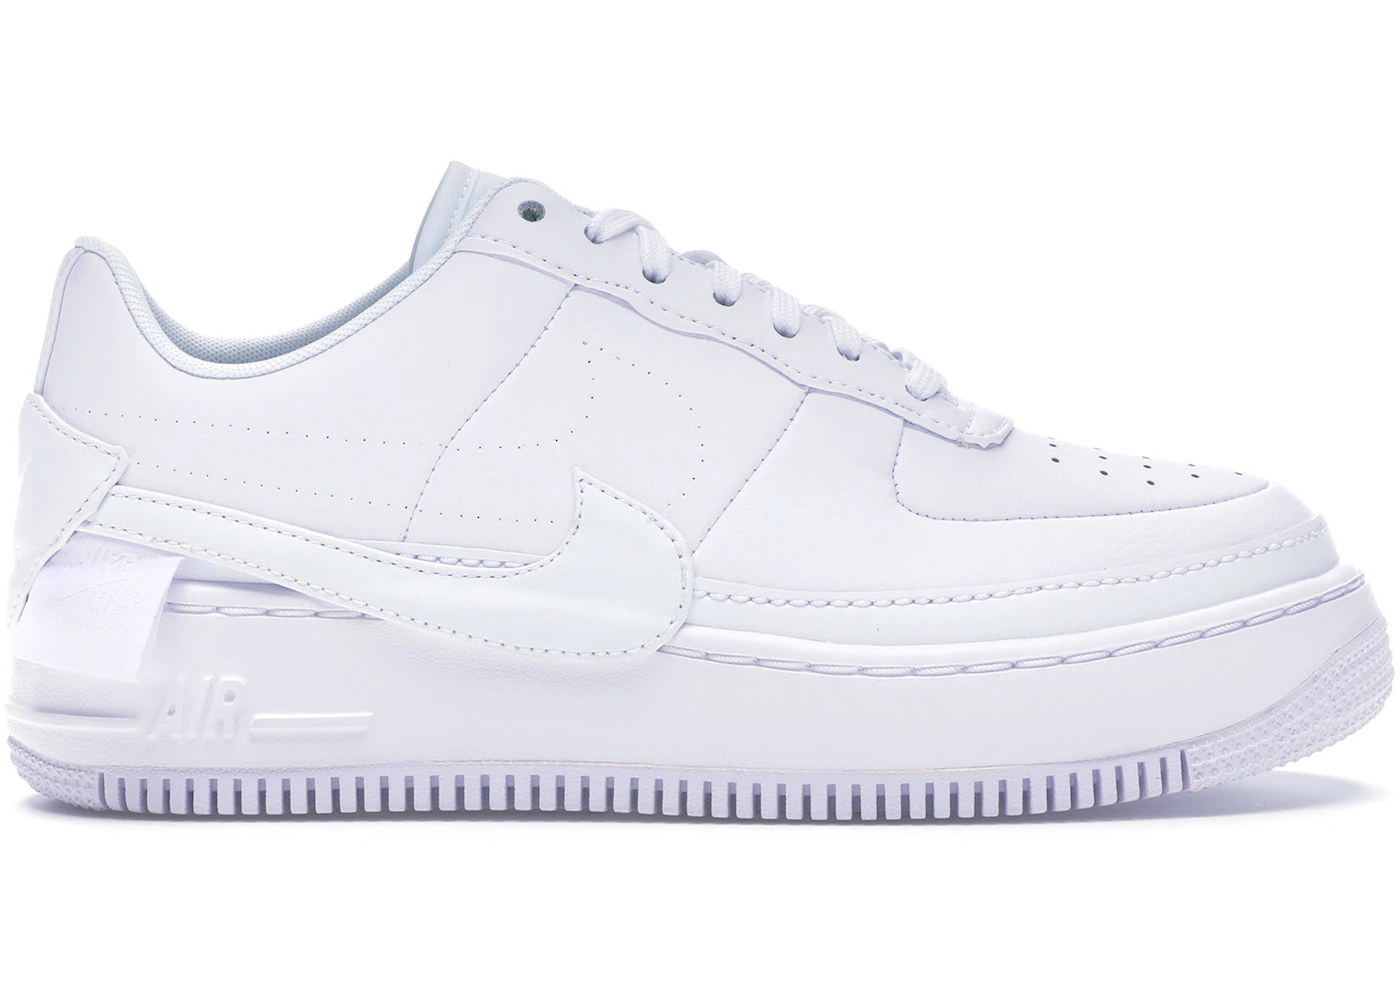 Chair Don't want bow Nike Air Force 1 Jester XX Triple White (W) - AO1220-101 - US